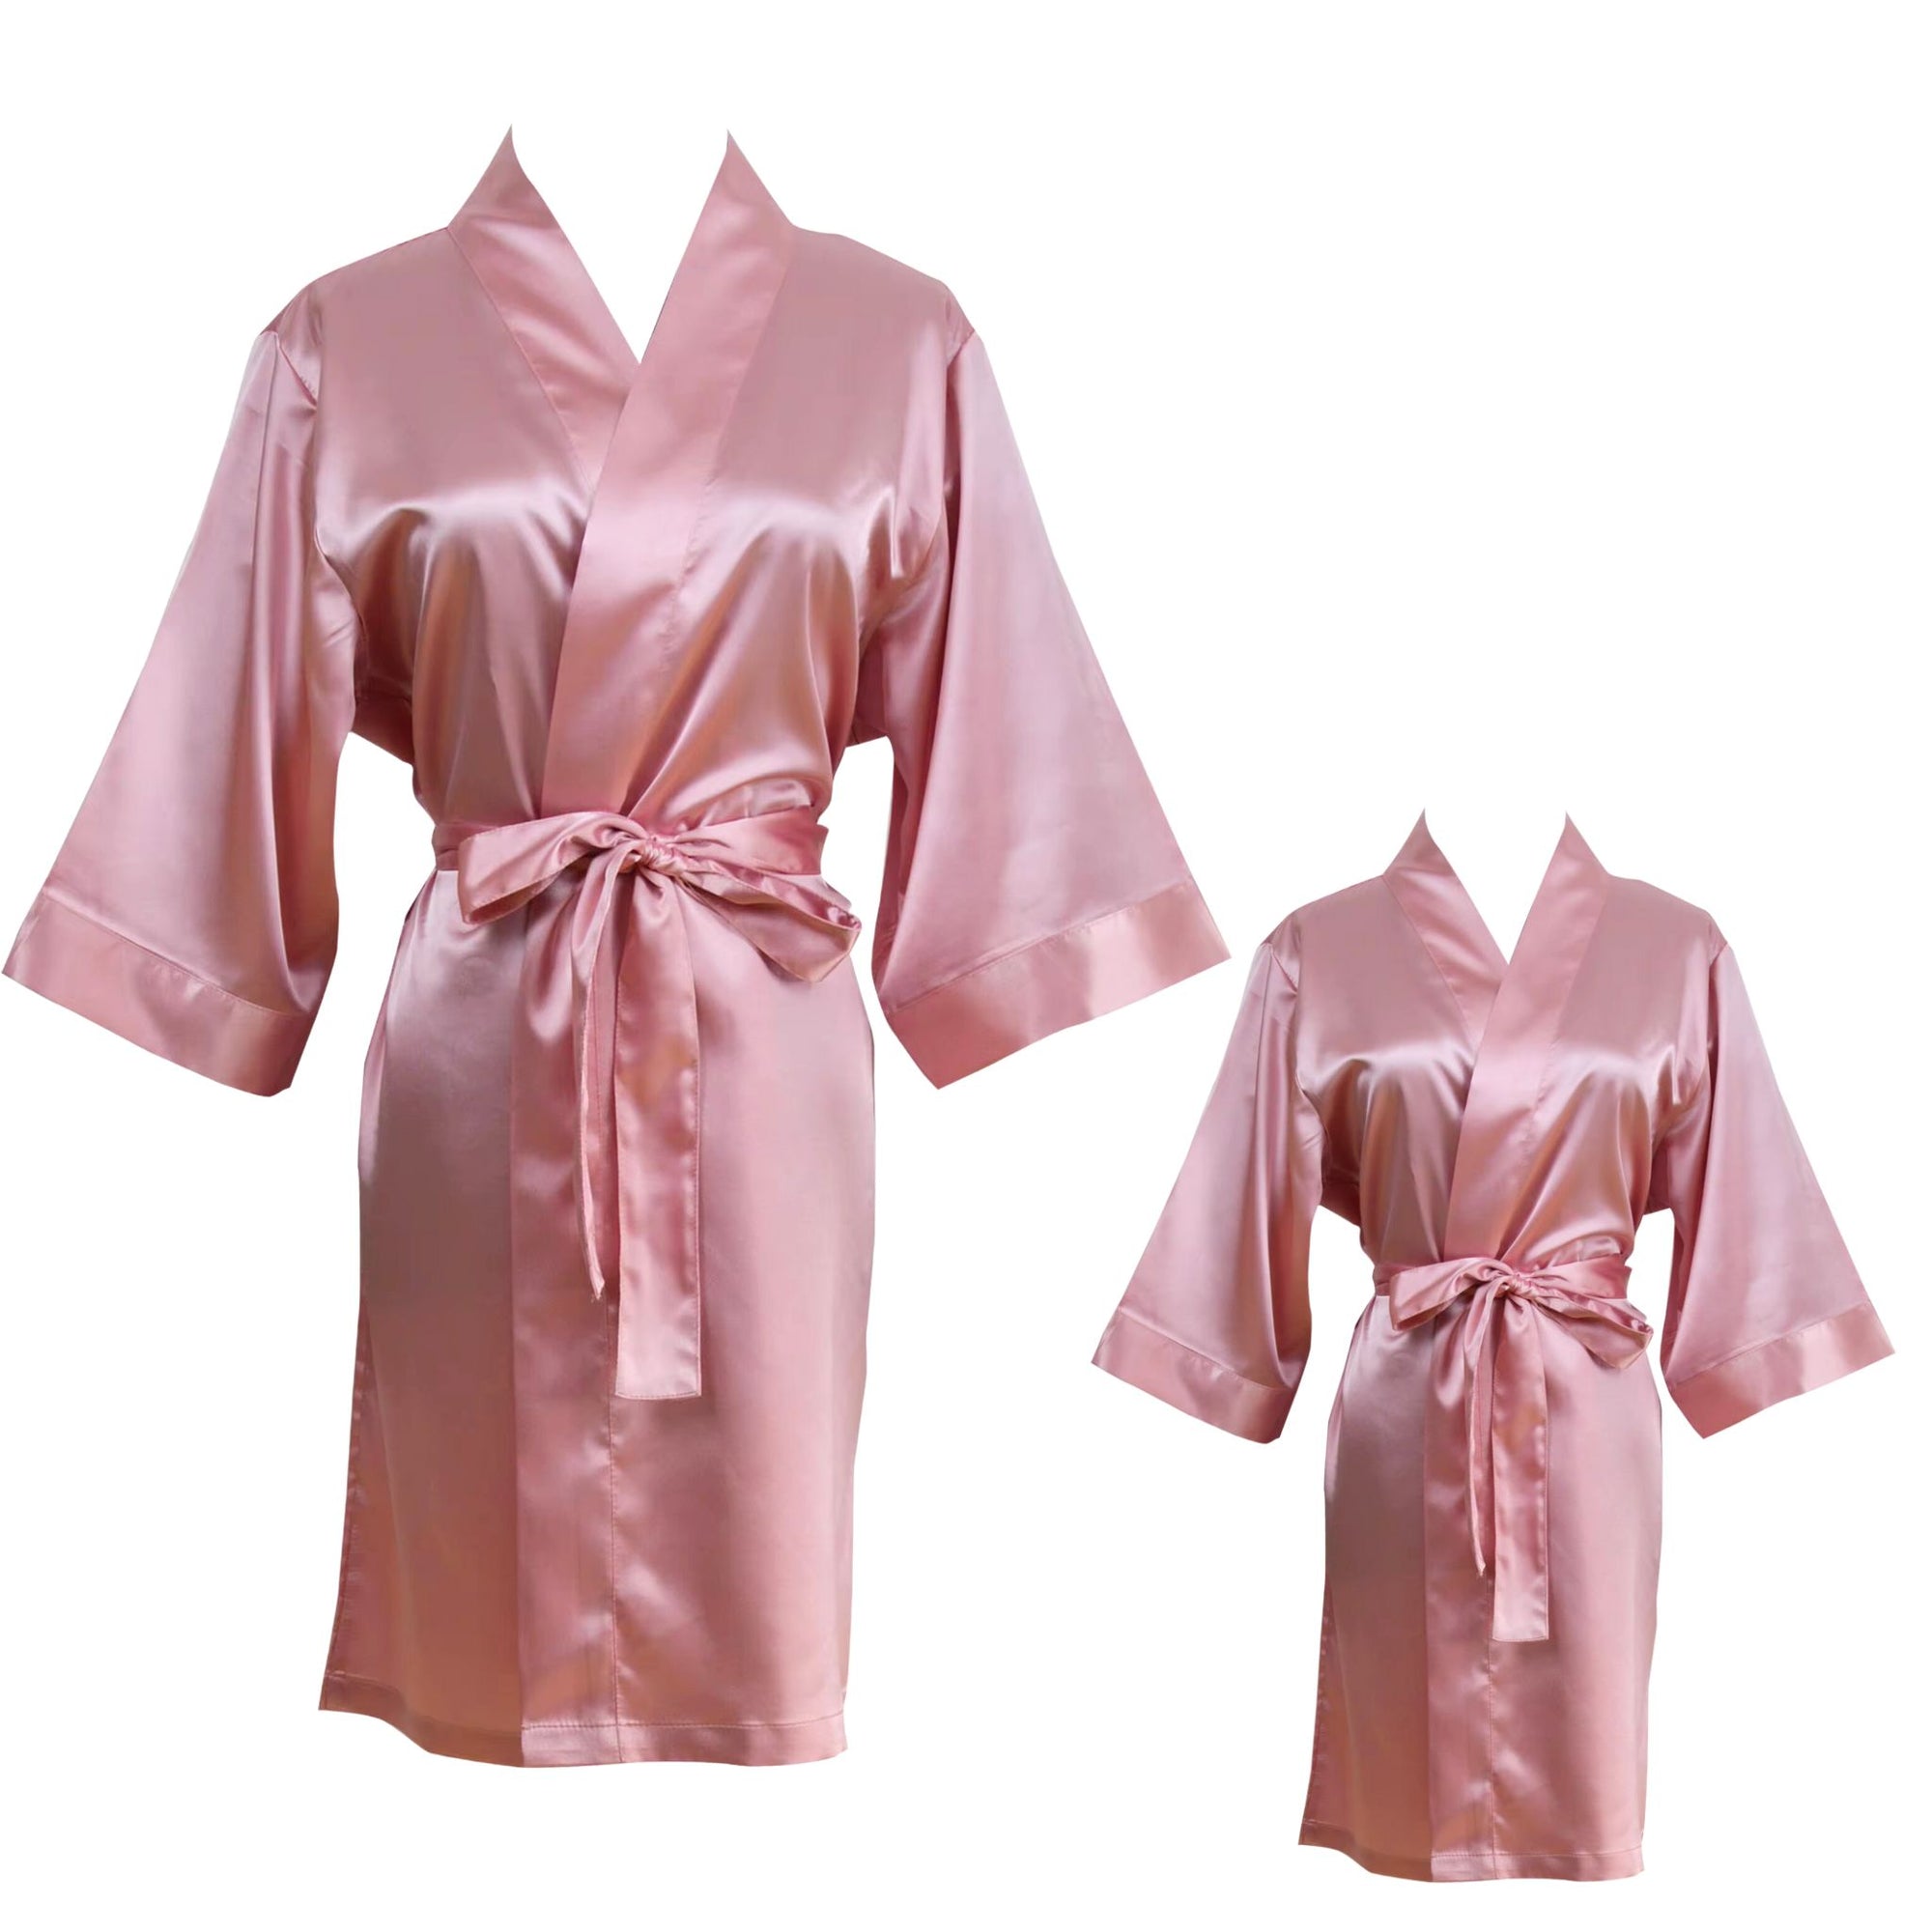 Mommy and me robe set with matching reversible bonnet pink